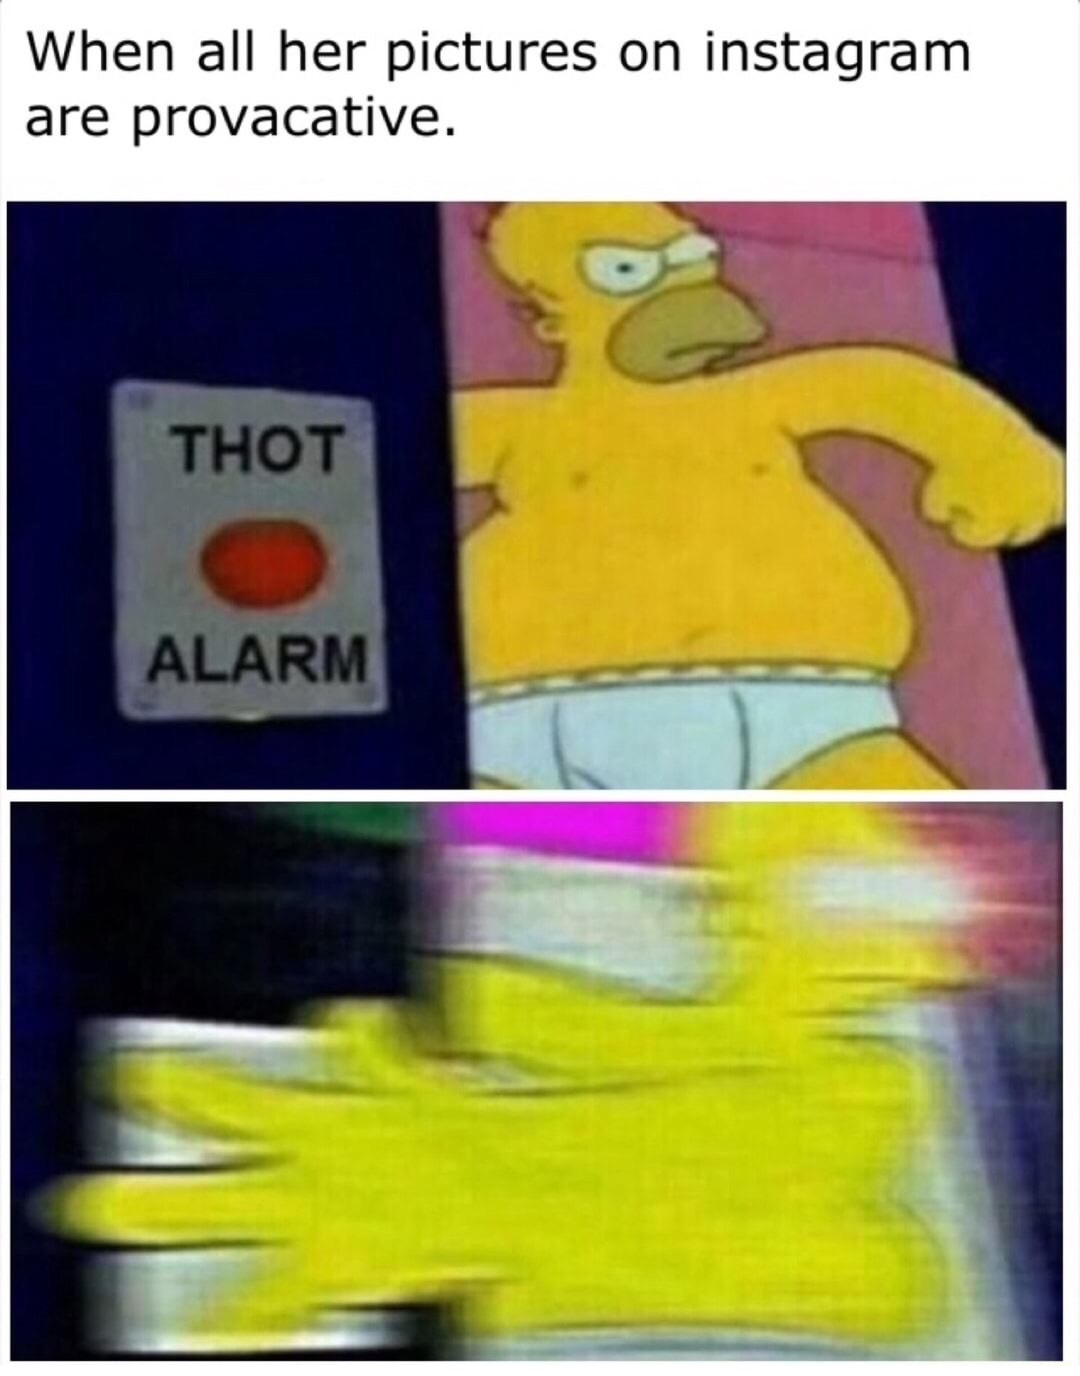 thot alarm - When all her pictures on instagram are provacative. Thot Alarm